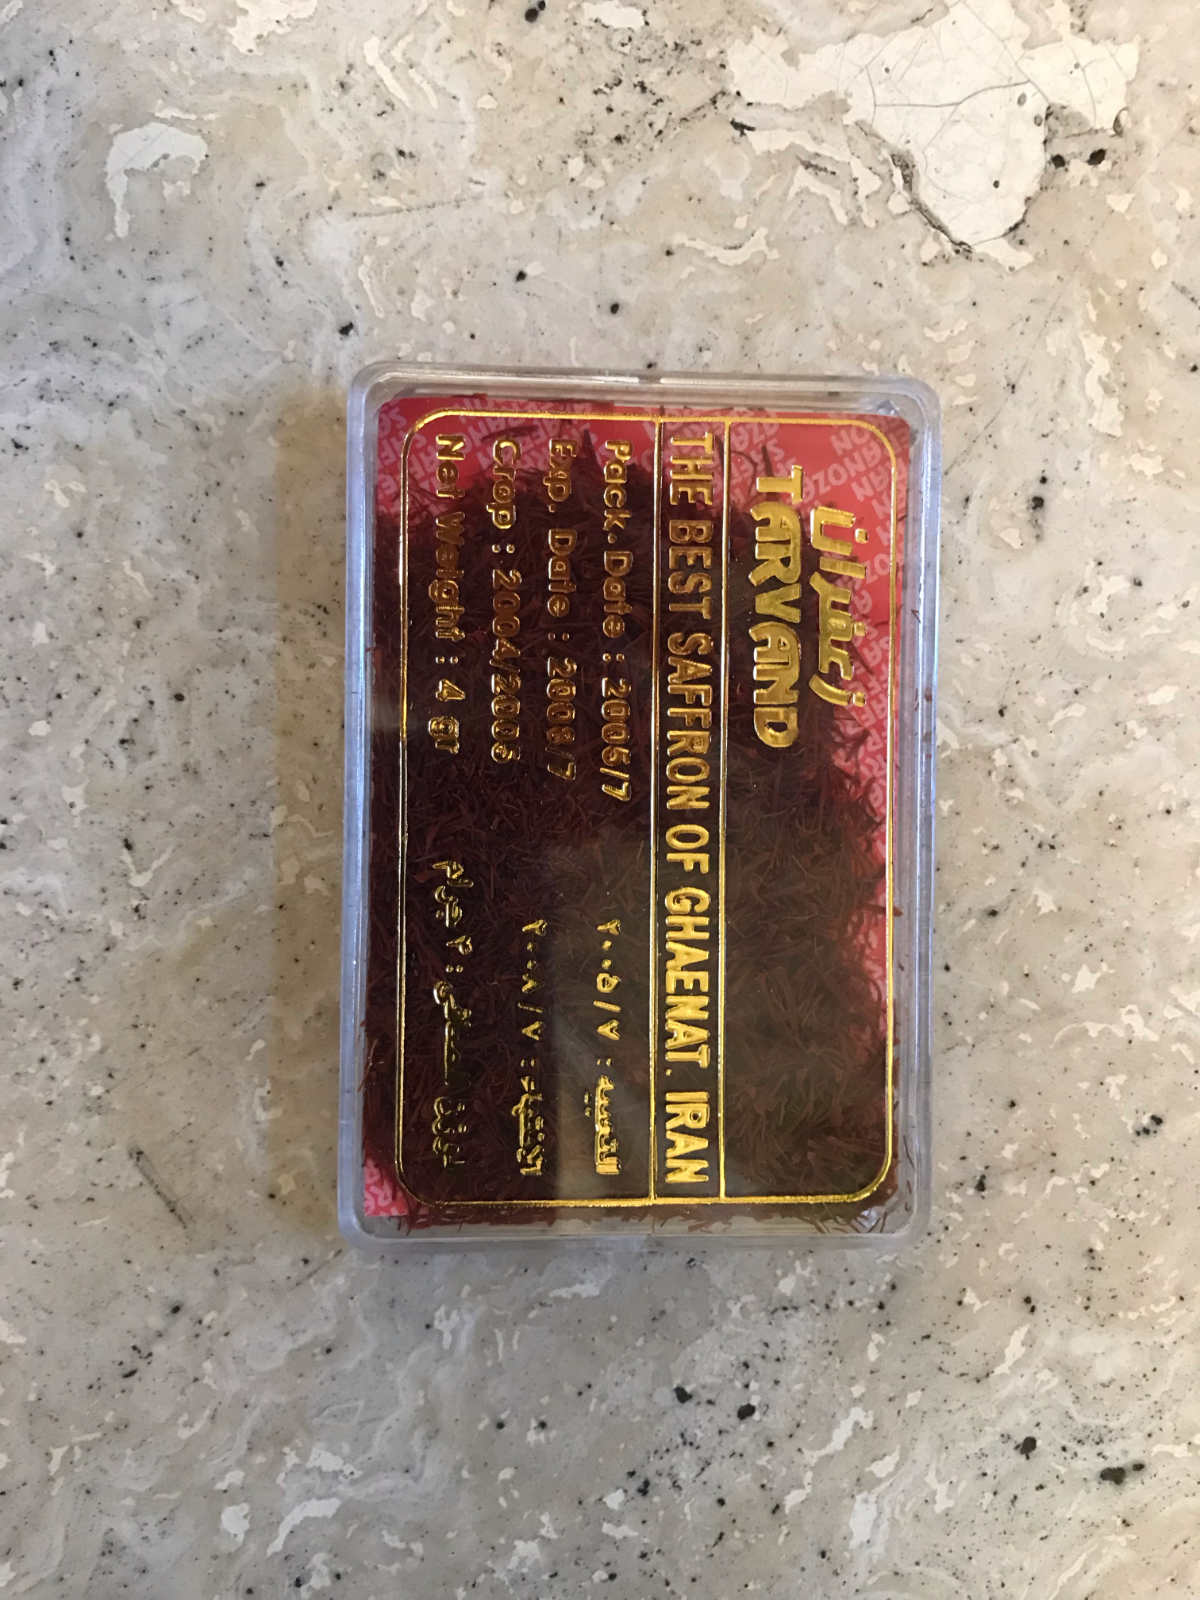 Saffron in a plastic container with gold writing.